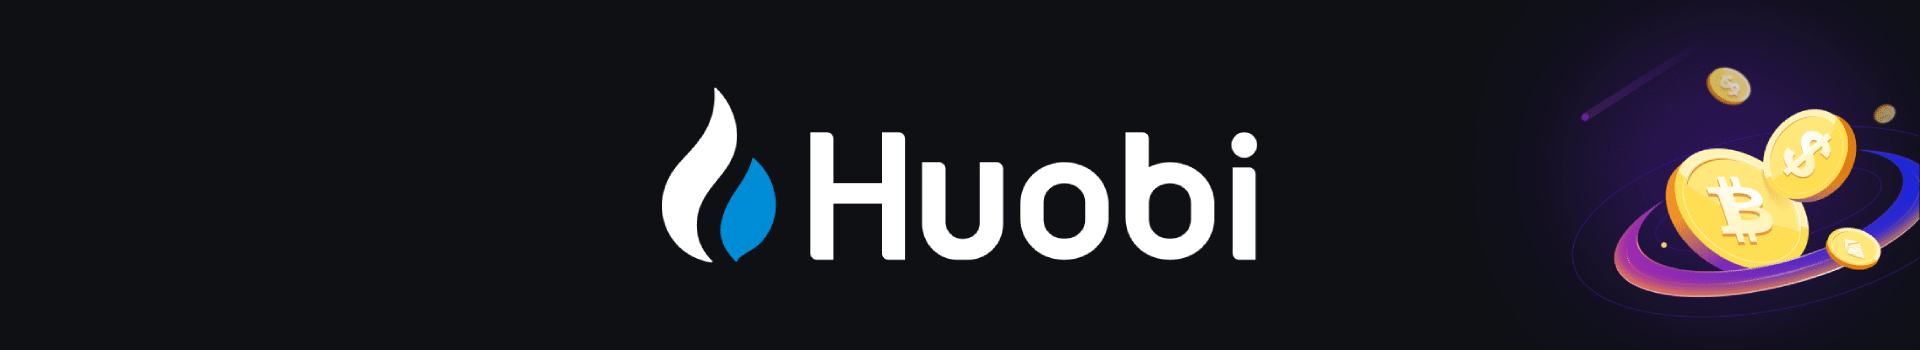 Huobi Review | Pros, Cons & Key Features